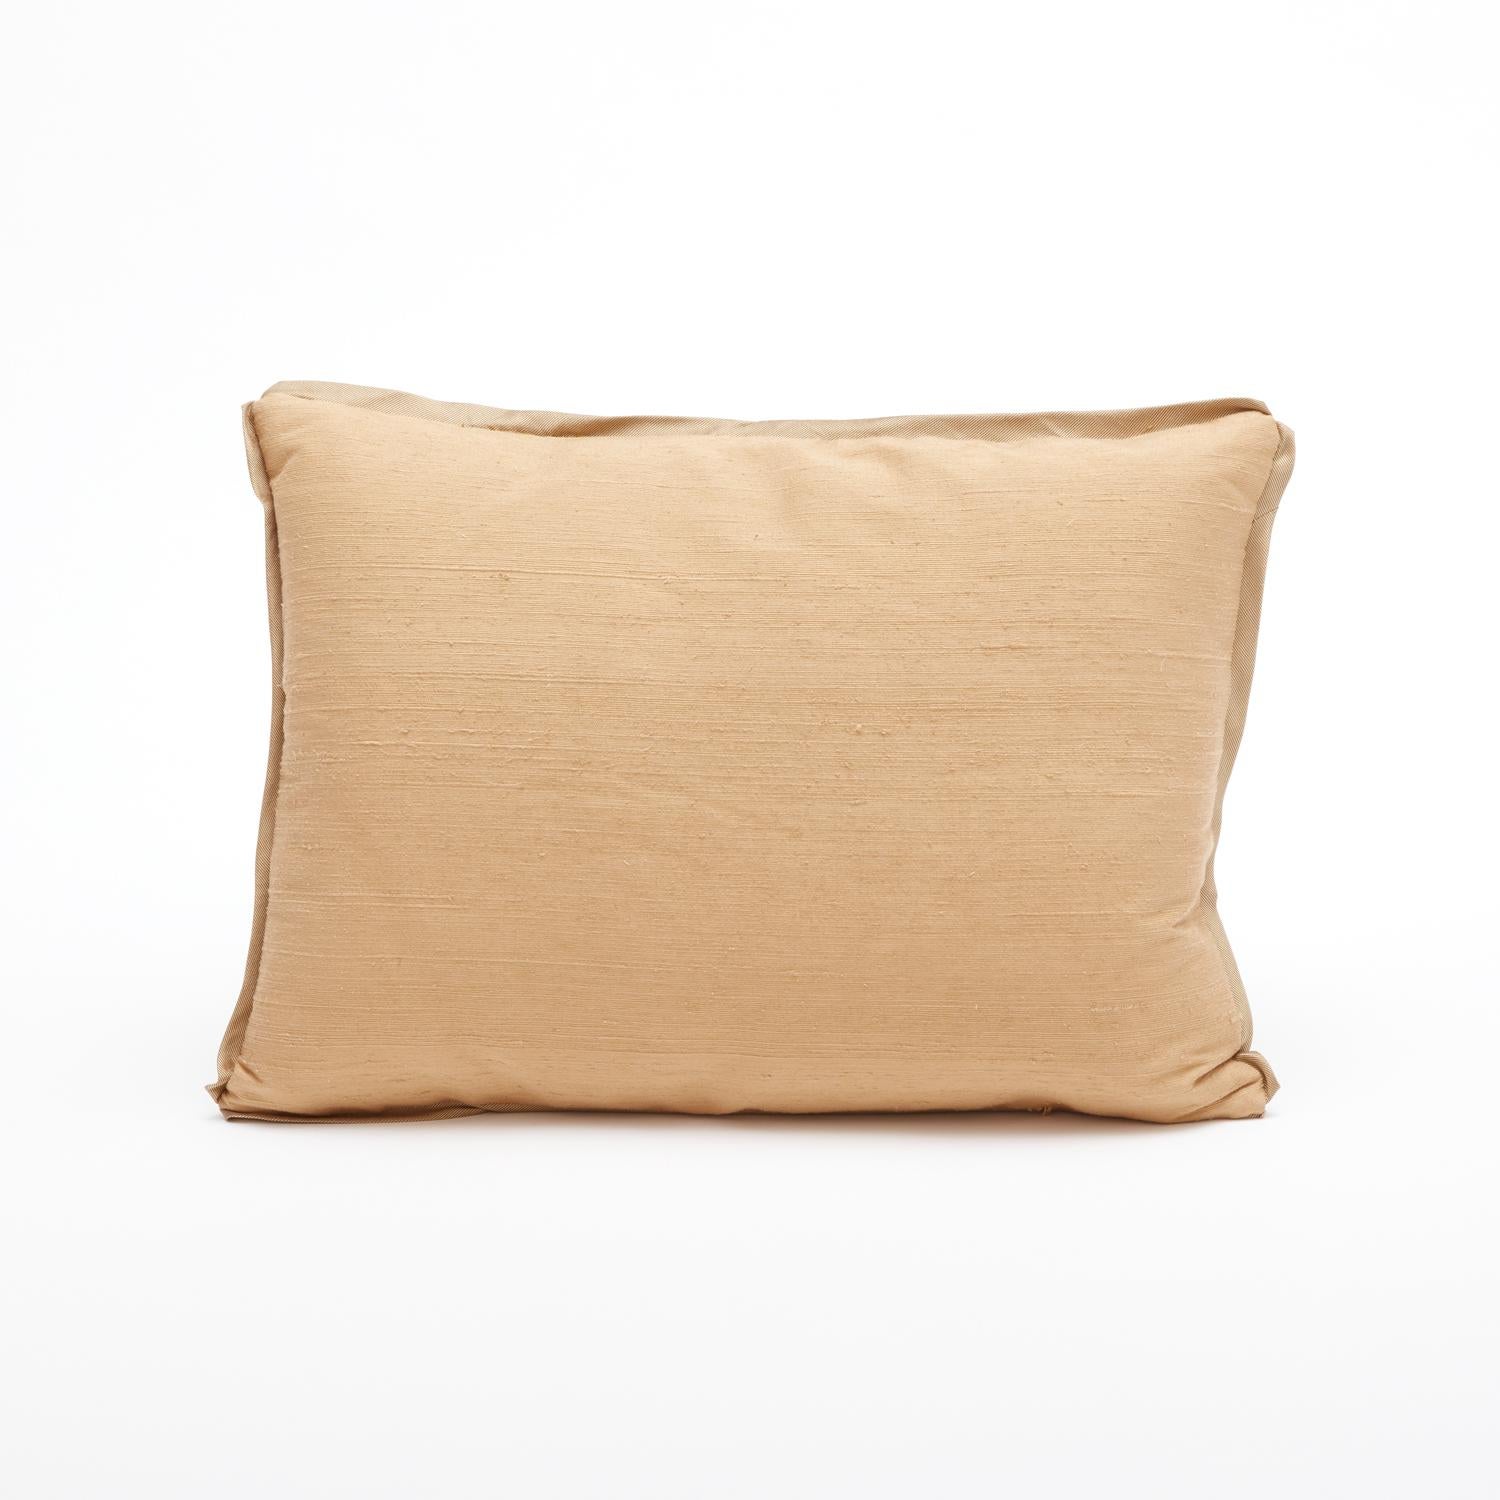 Contemporary Rectangular Fortuny Fabric Cushion in the Glicine Pattern